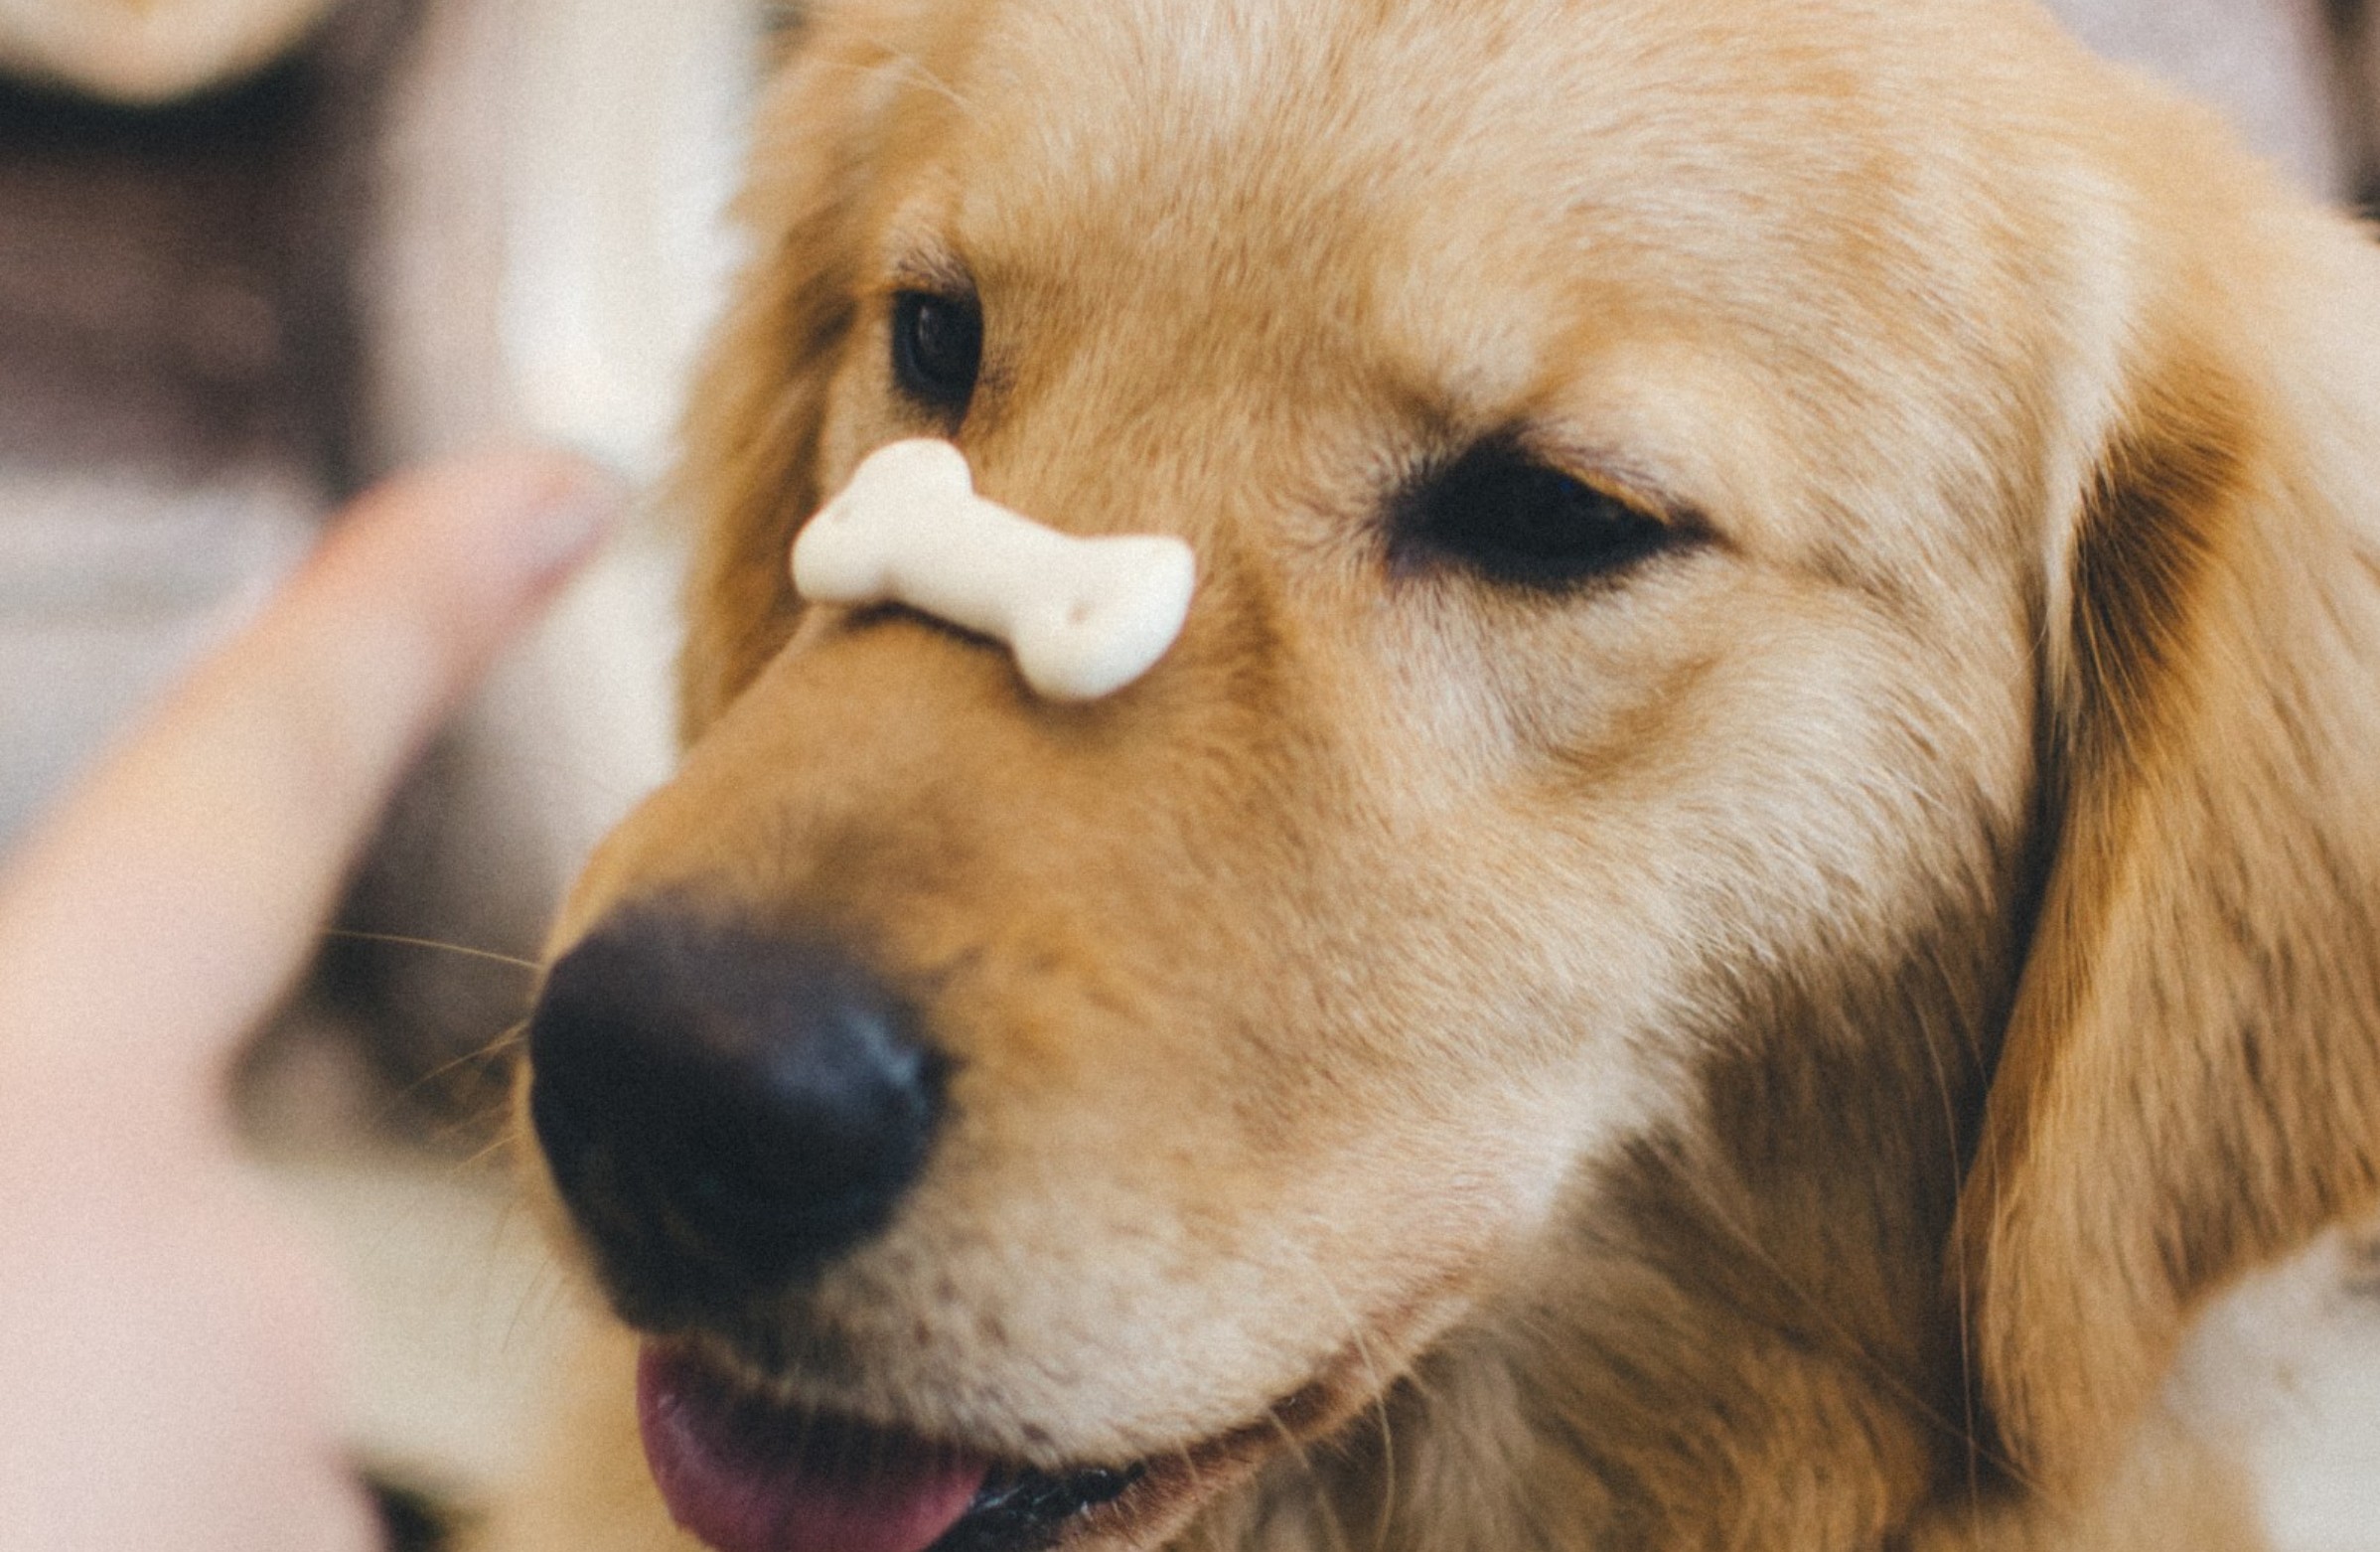 Brown dog with a treat balanced on it's nose. Source: Mimicry Hu on Unsplash.